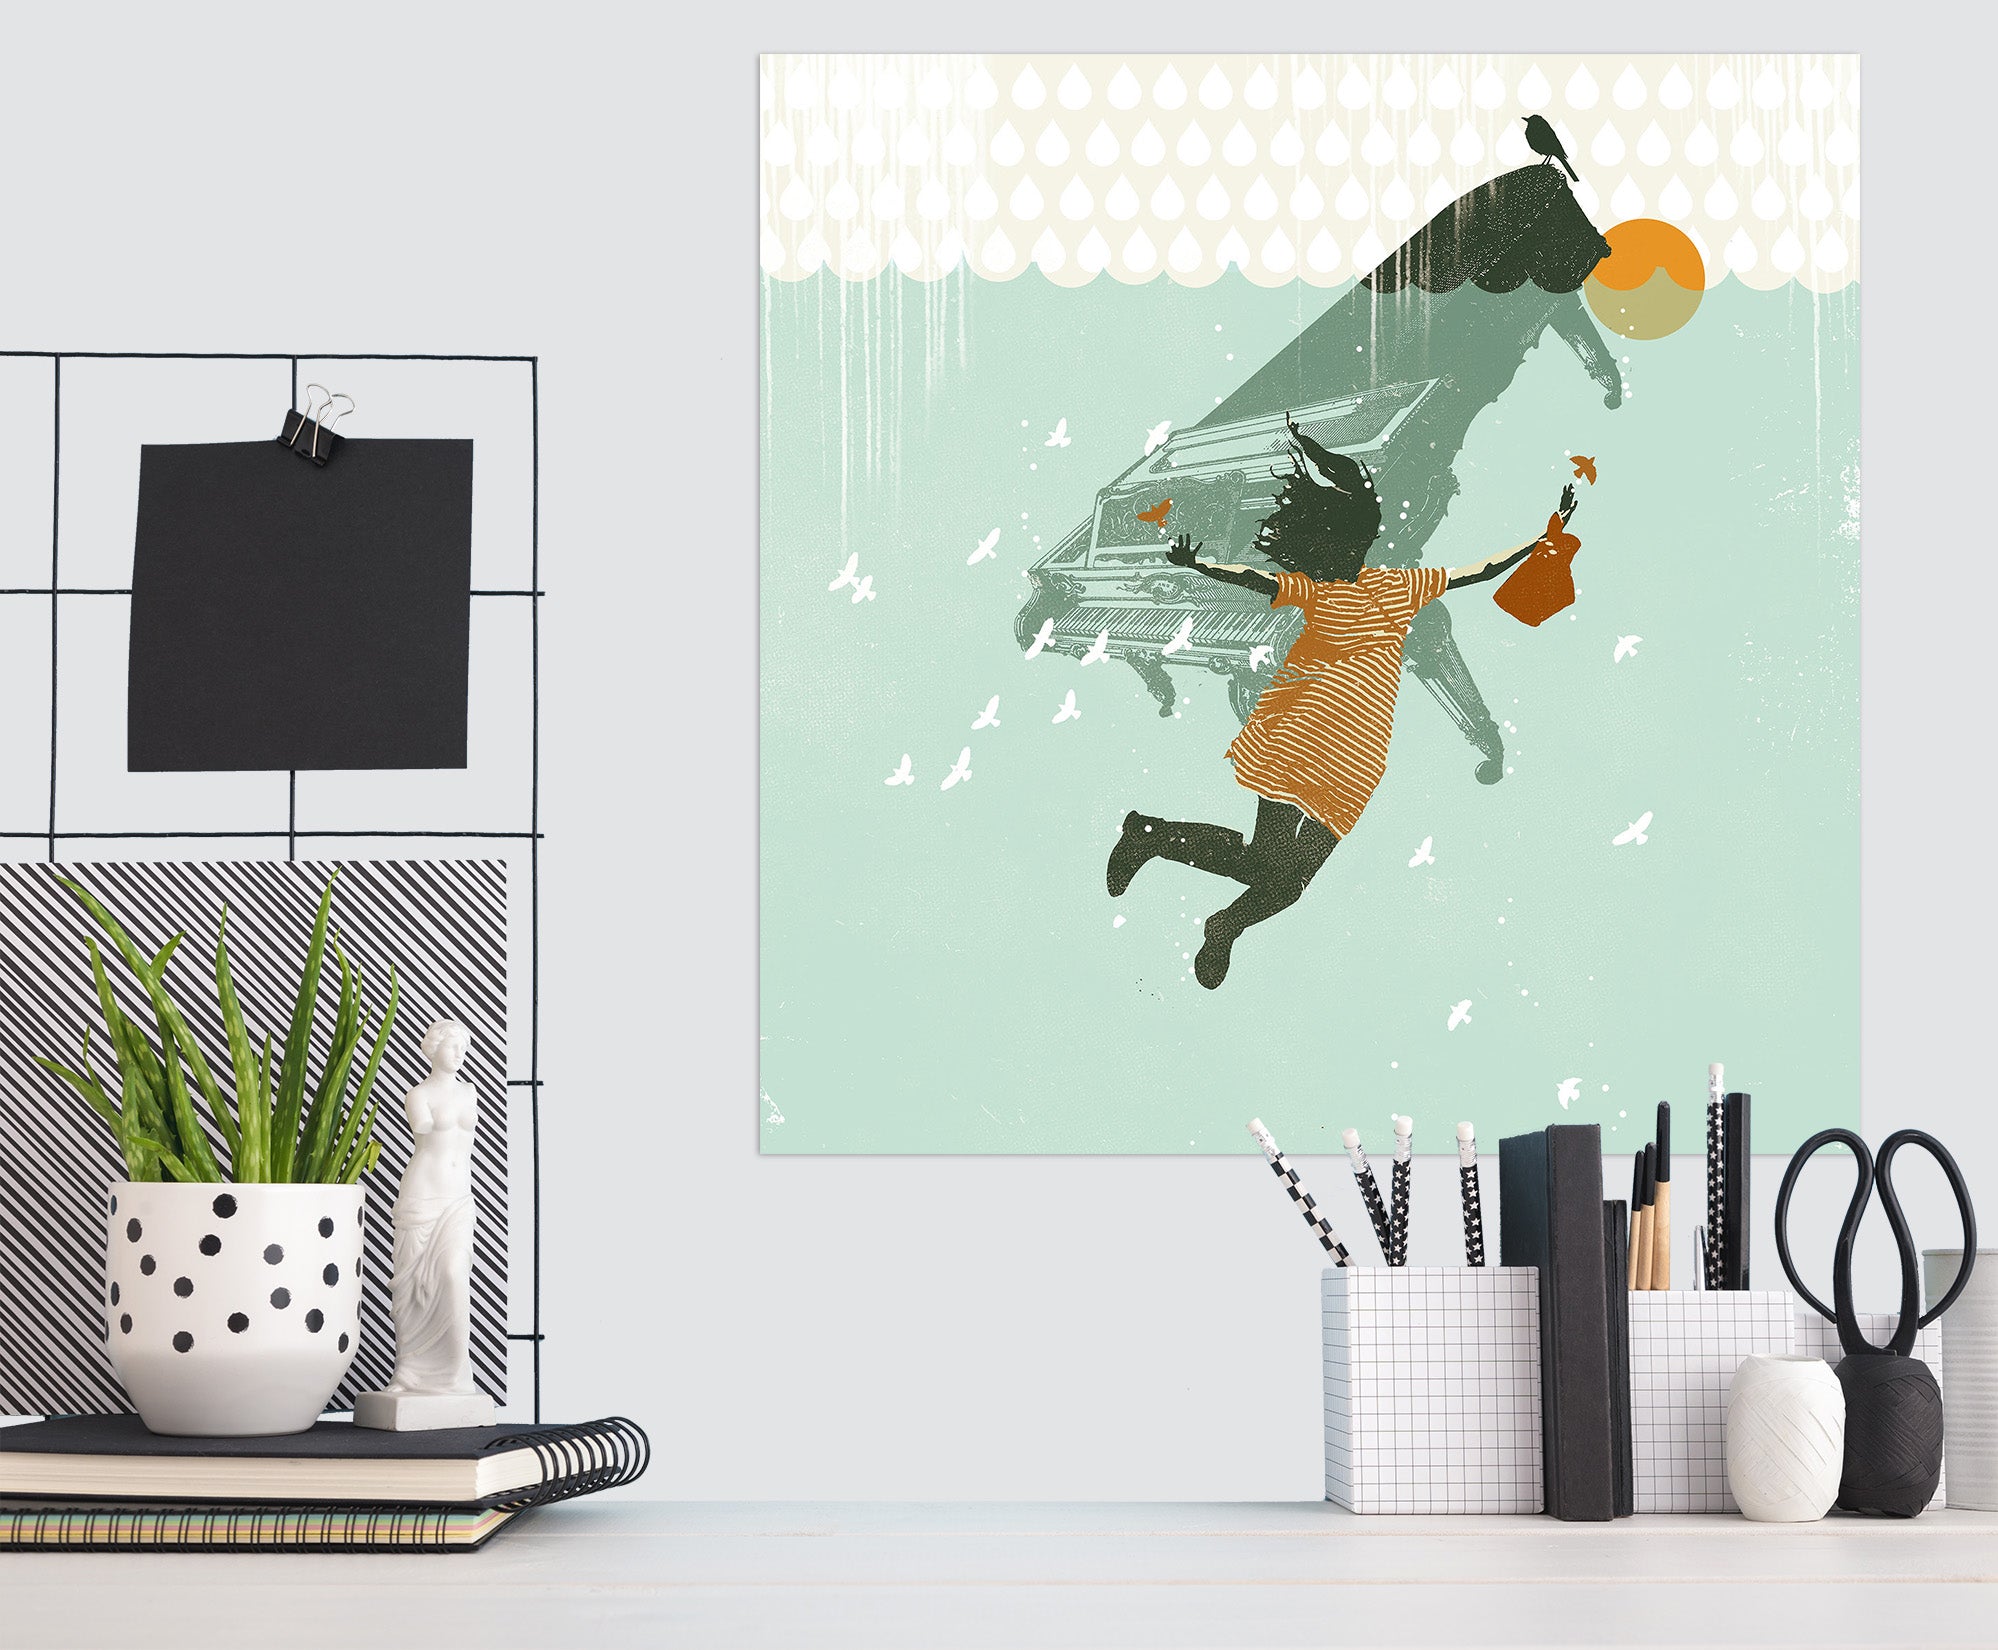 3D Swimming In The Water 029 Showdeer Wall Sticker